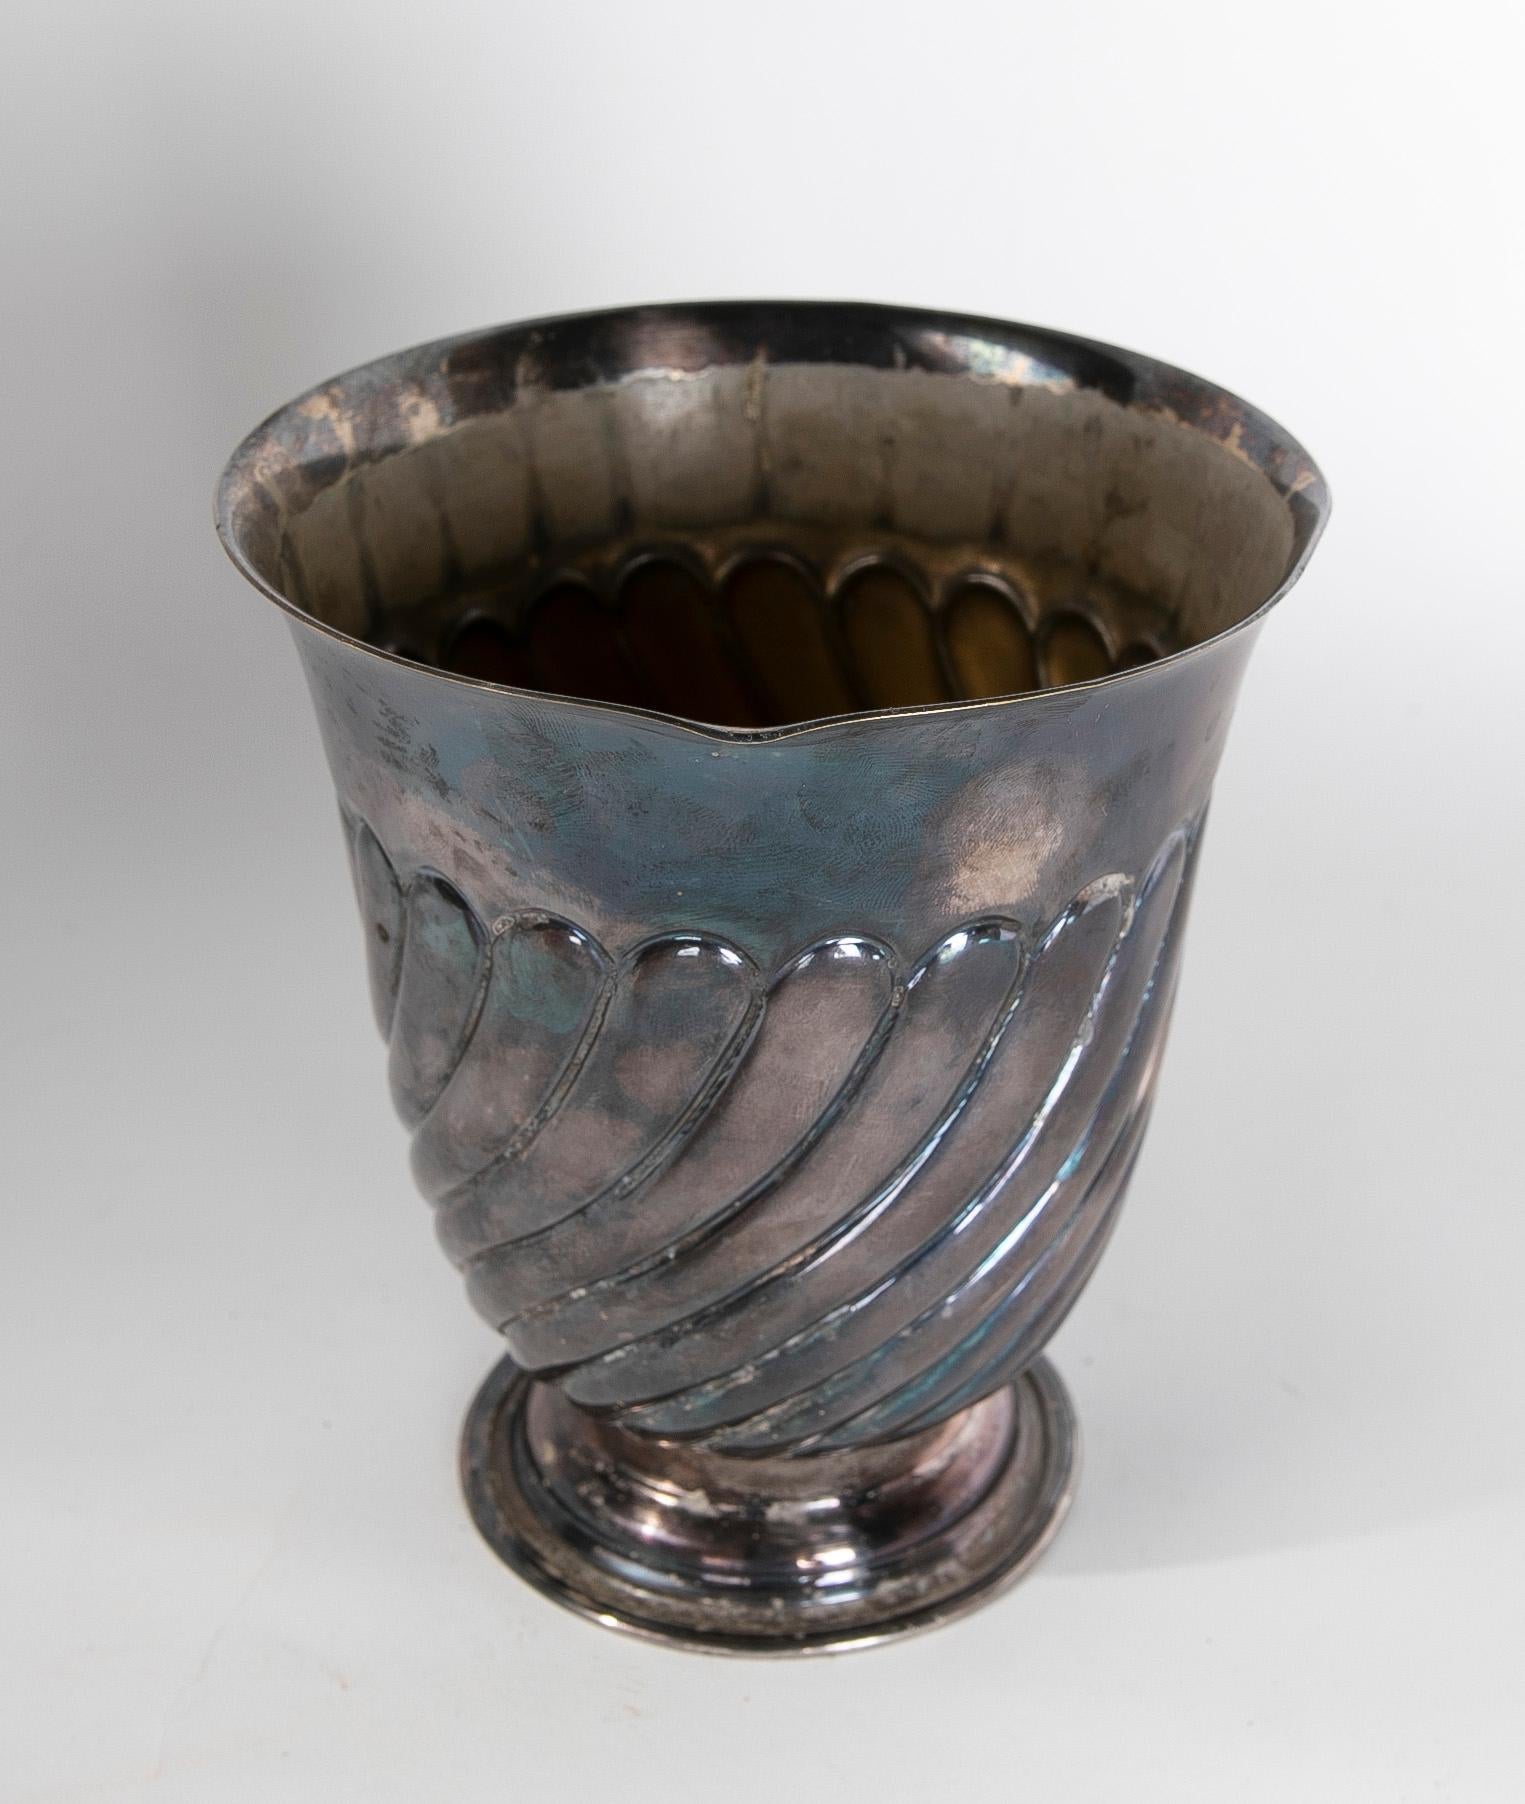 Metallic Thread 1970s Italian Silver-Plated Metal Cup For Sale